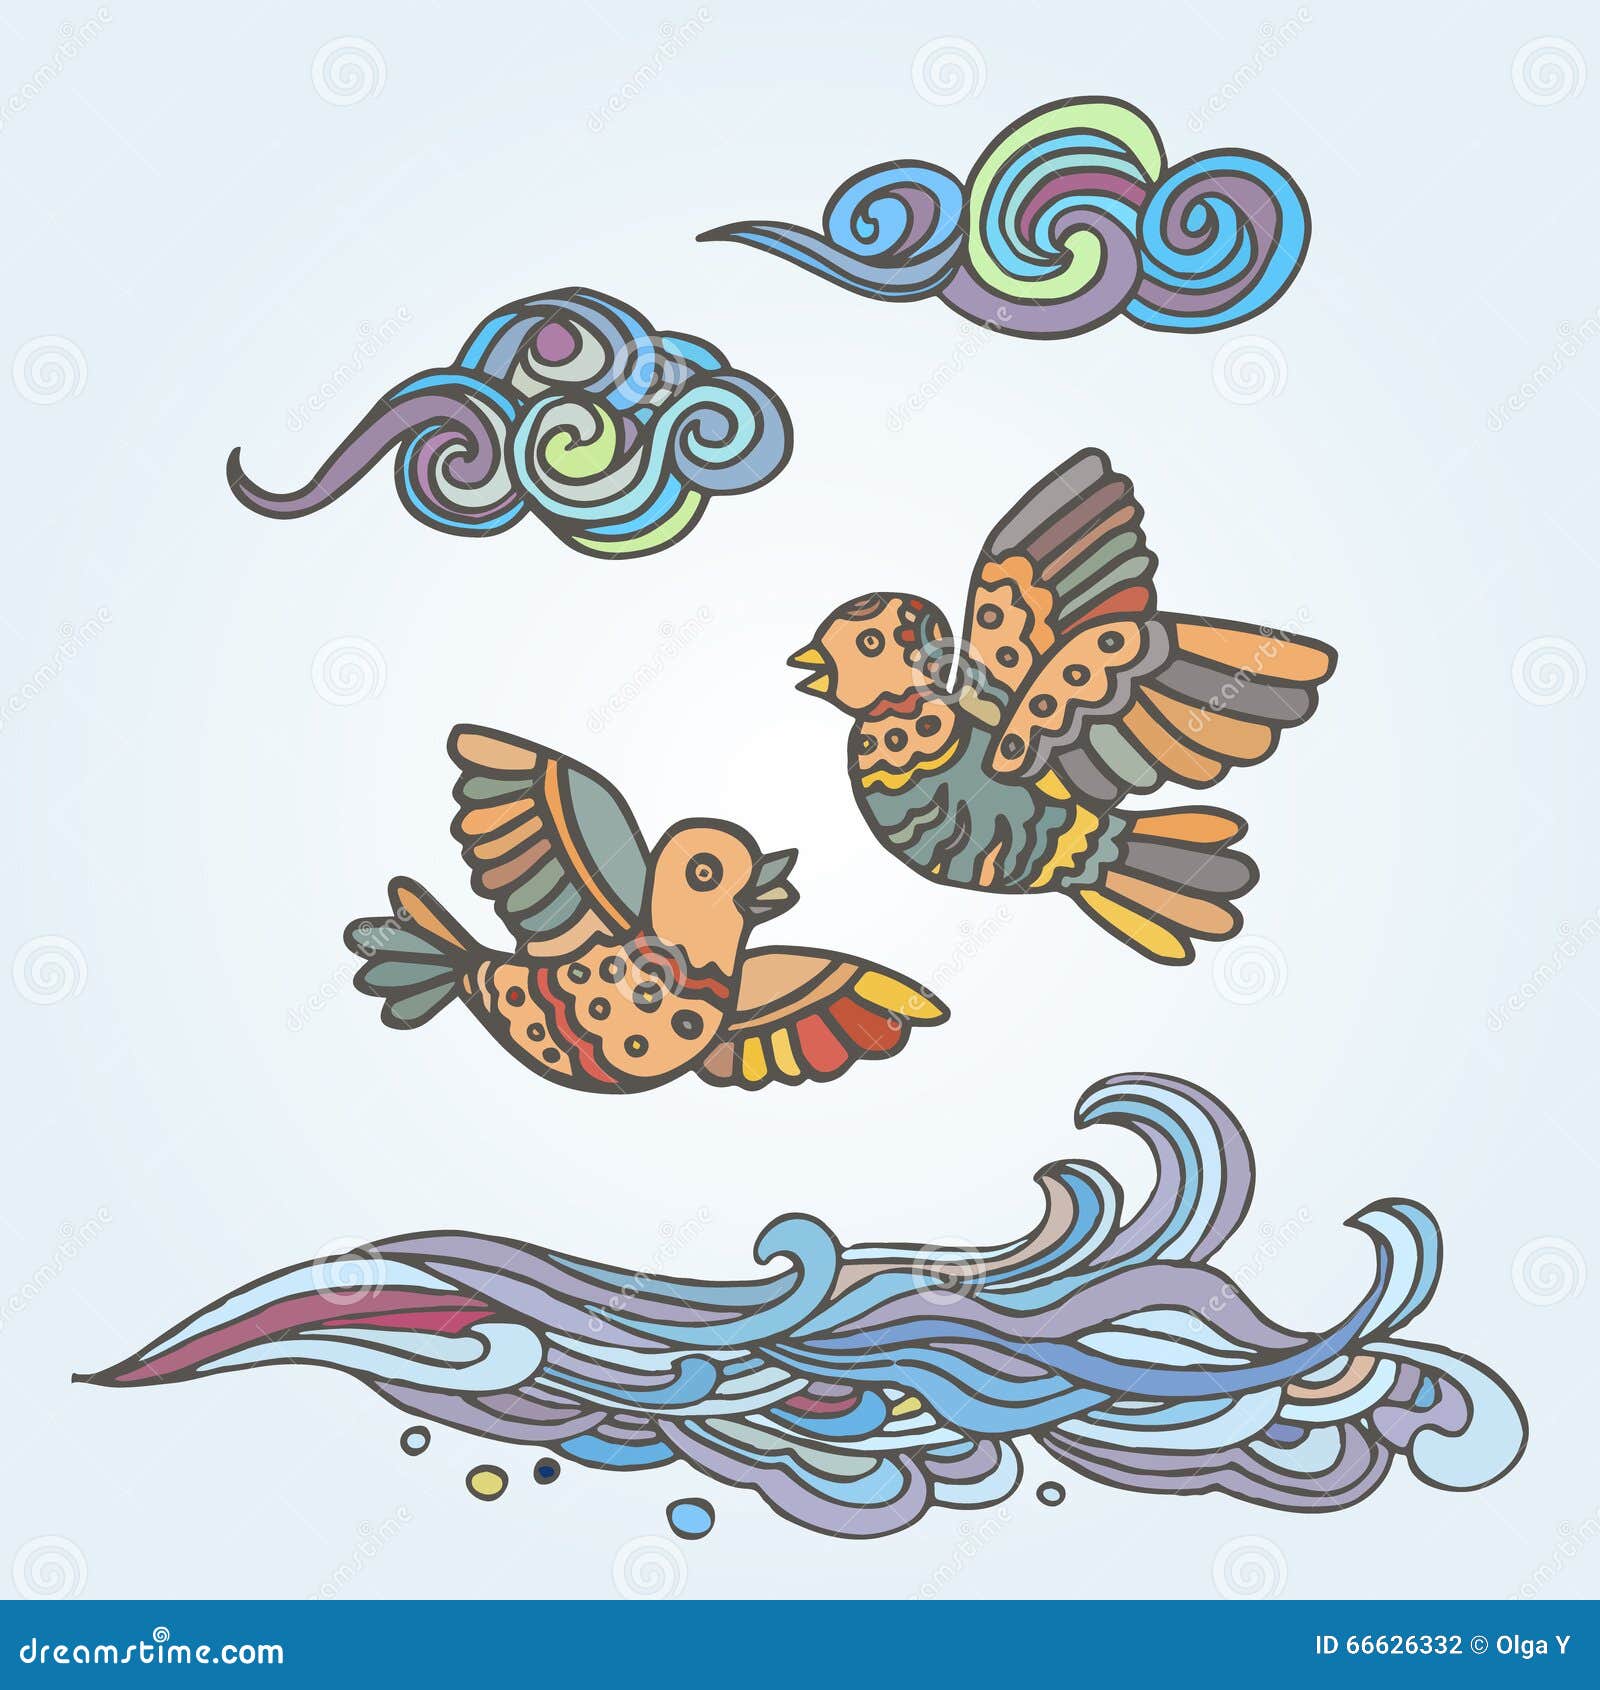 Hand-drawn Illustration of Two Flying Birds and Clouds Decorative Stock